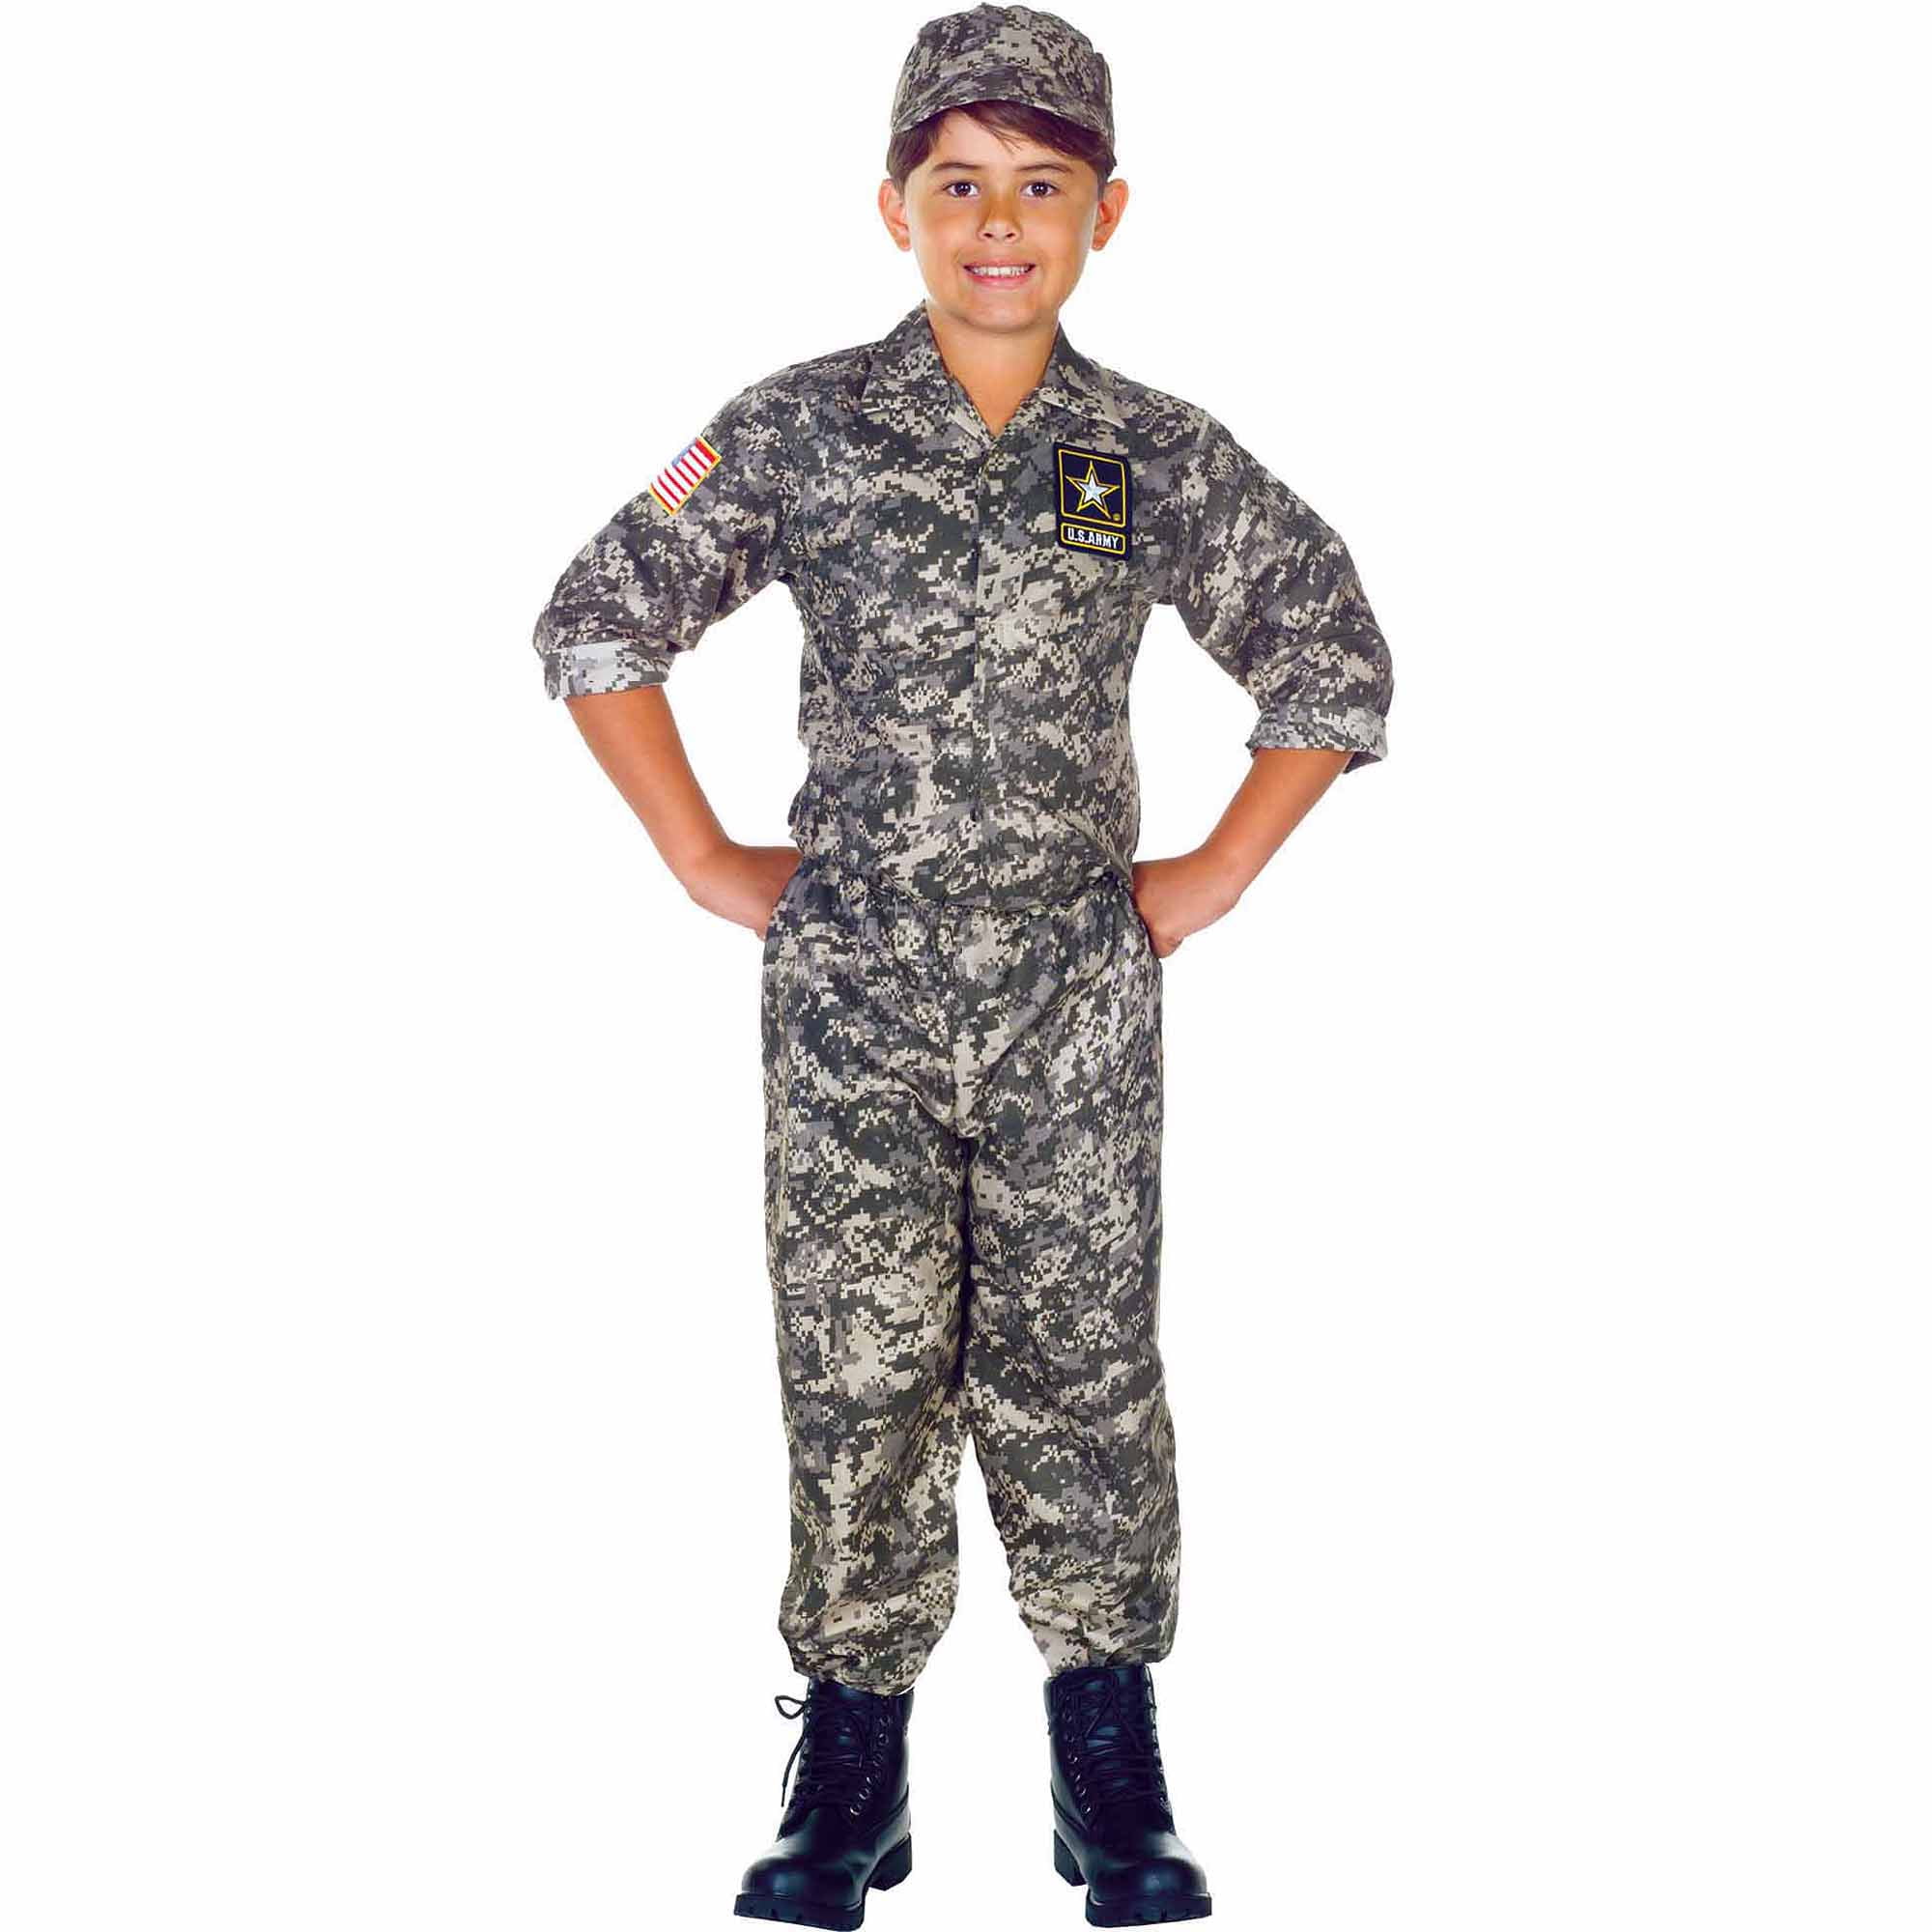 Child Boys Kids Army Soldier Fancy Dress Costume Party Uniform Military Outfit 